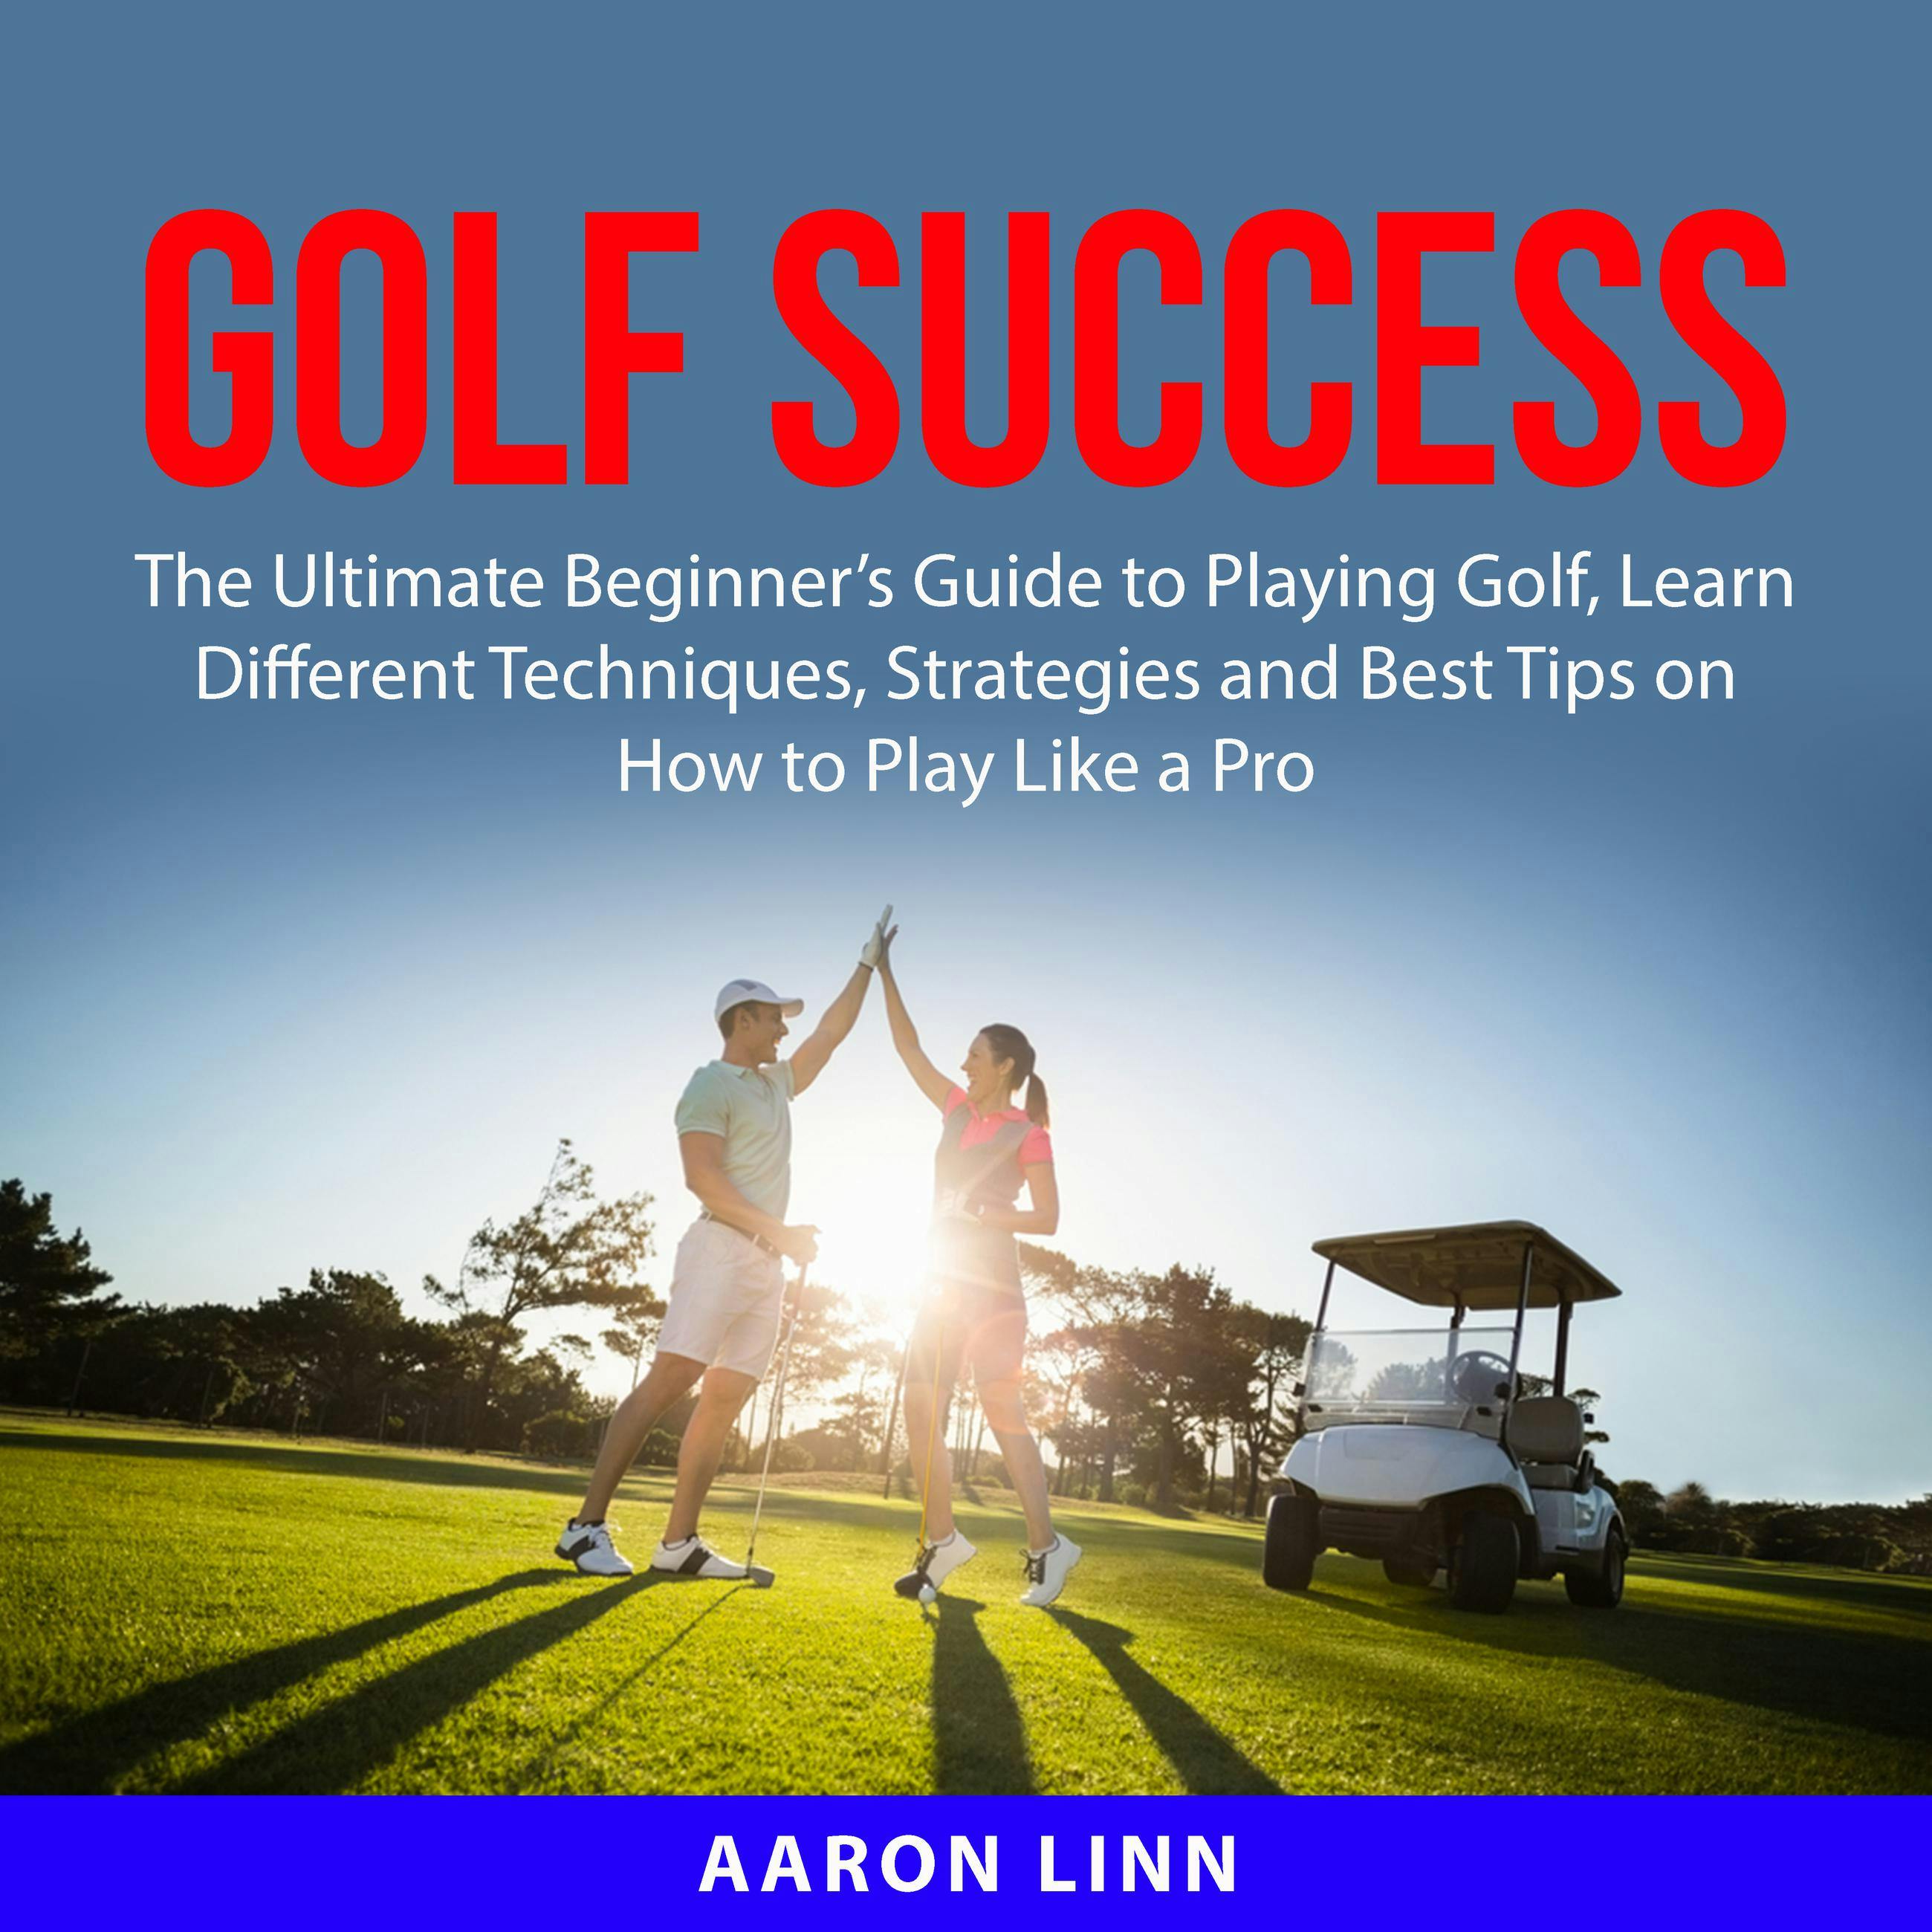 Golf Success: The Ultimate Beginner’s Guide to Playing Golf, Learn Different Techniques, Strategies and Best Tips on How to Play Like a Pro - Aaron Linn